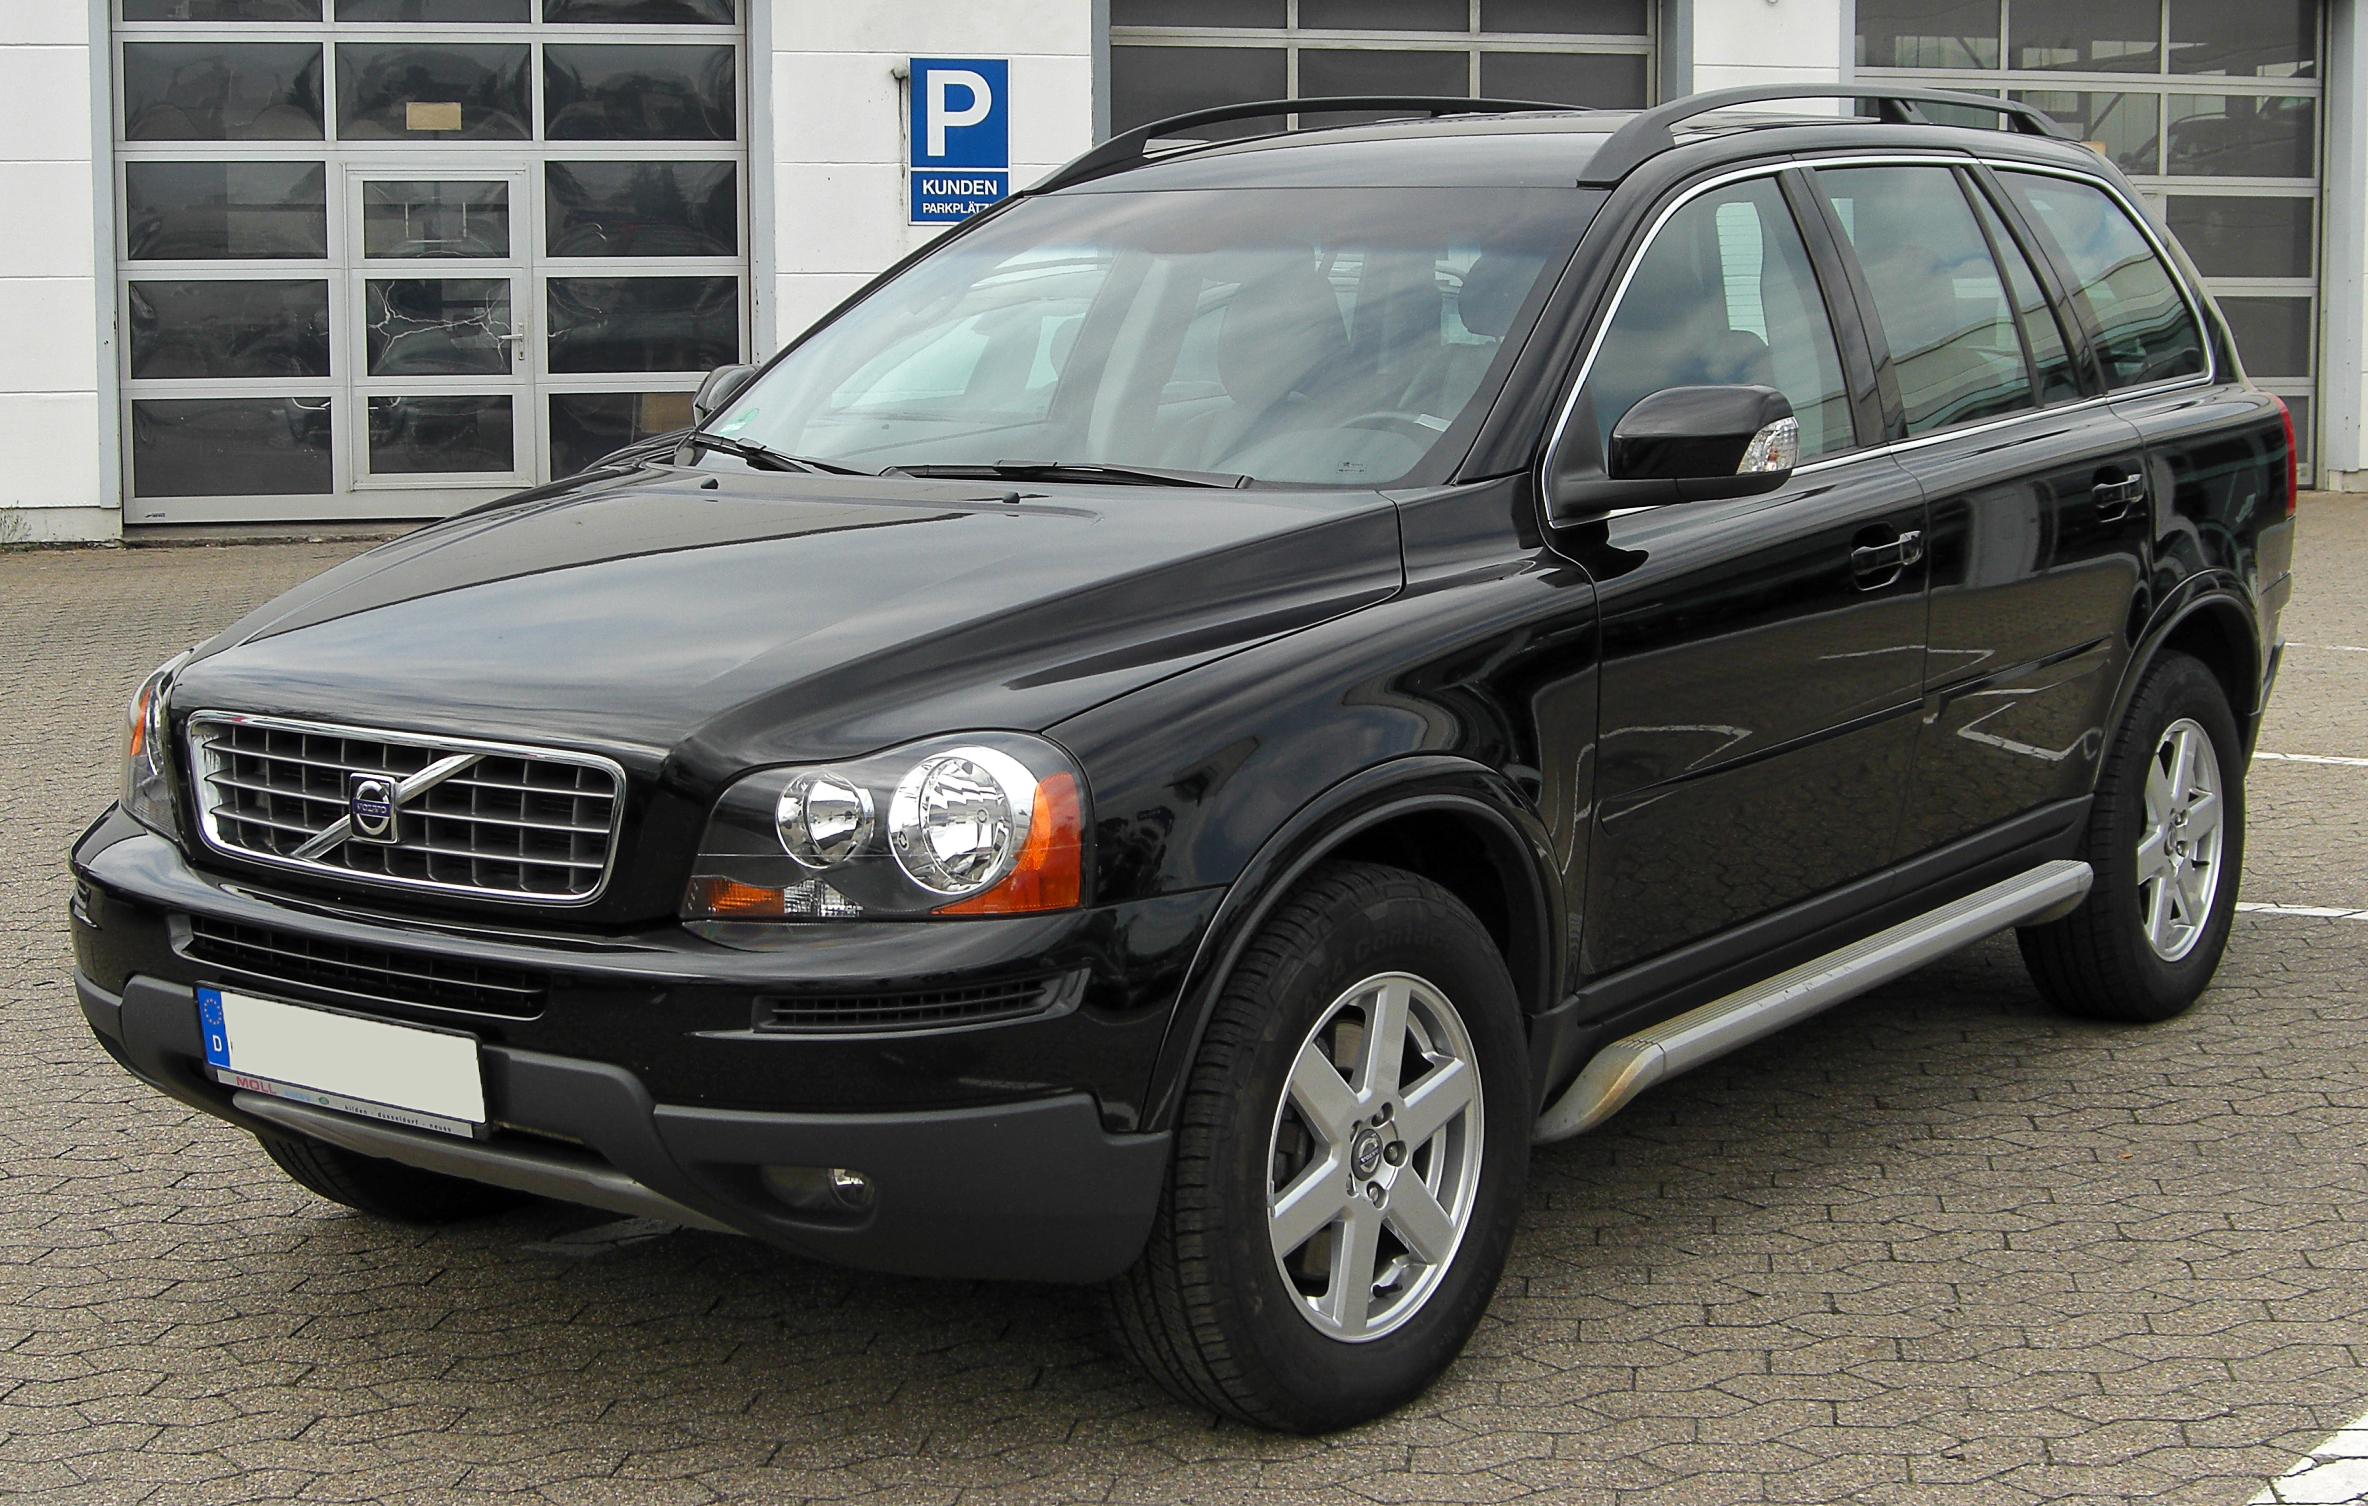 File:Volvo XC90 D5 AWD Facelift front 20100731.jpg - Wikimedia Commons